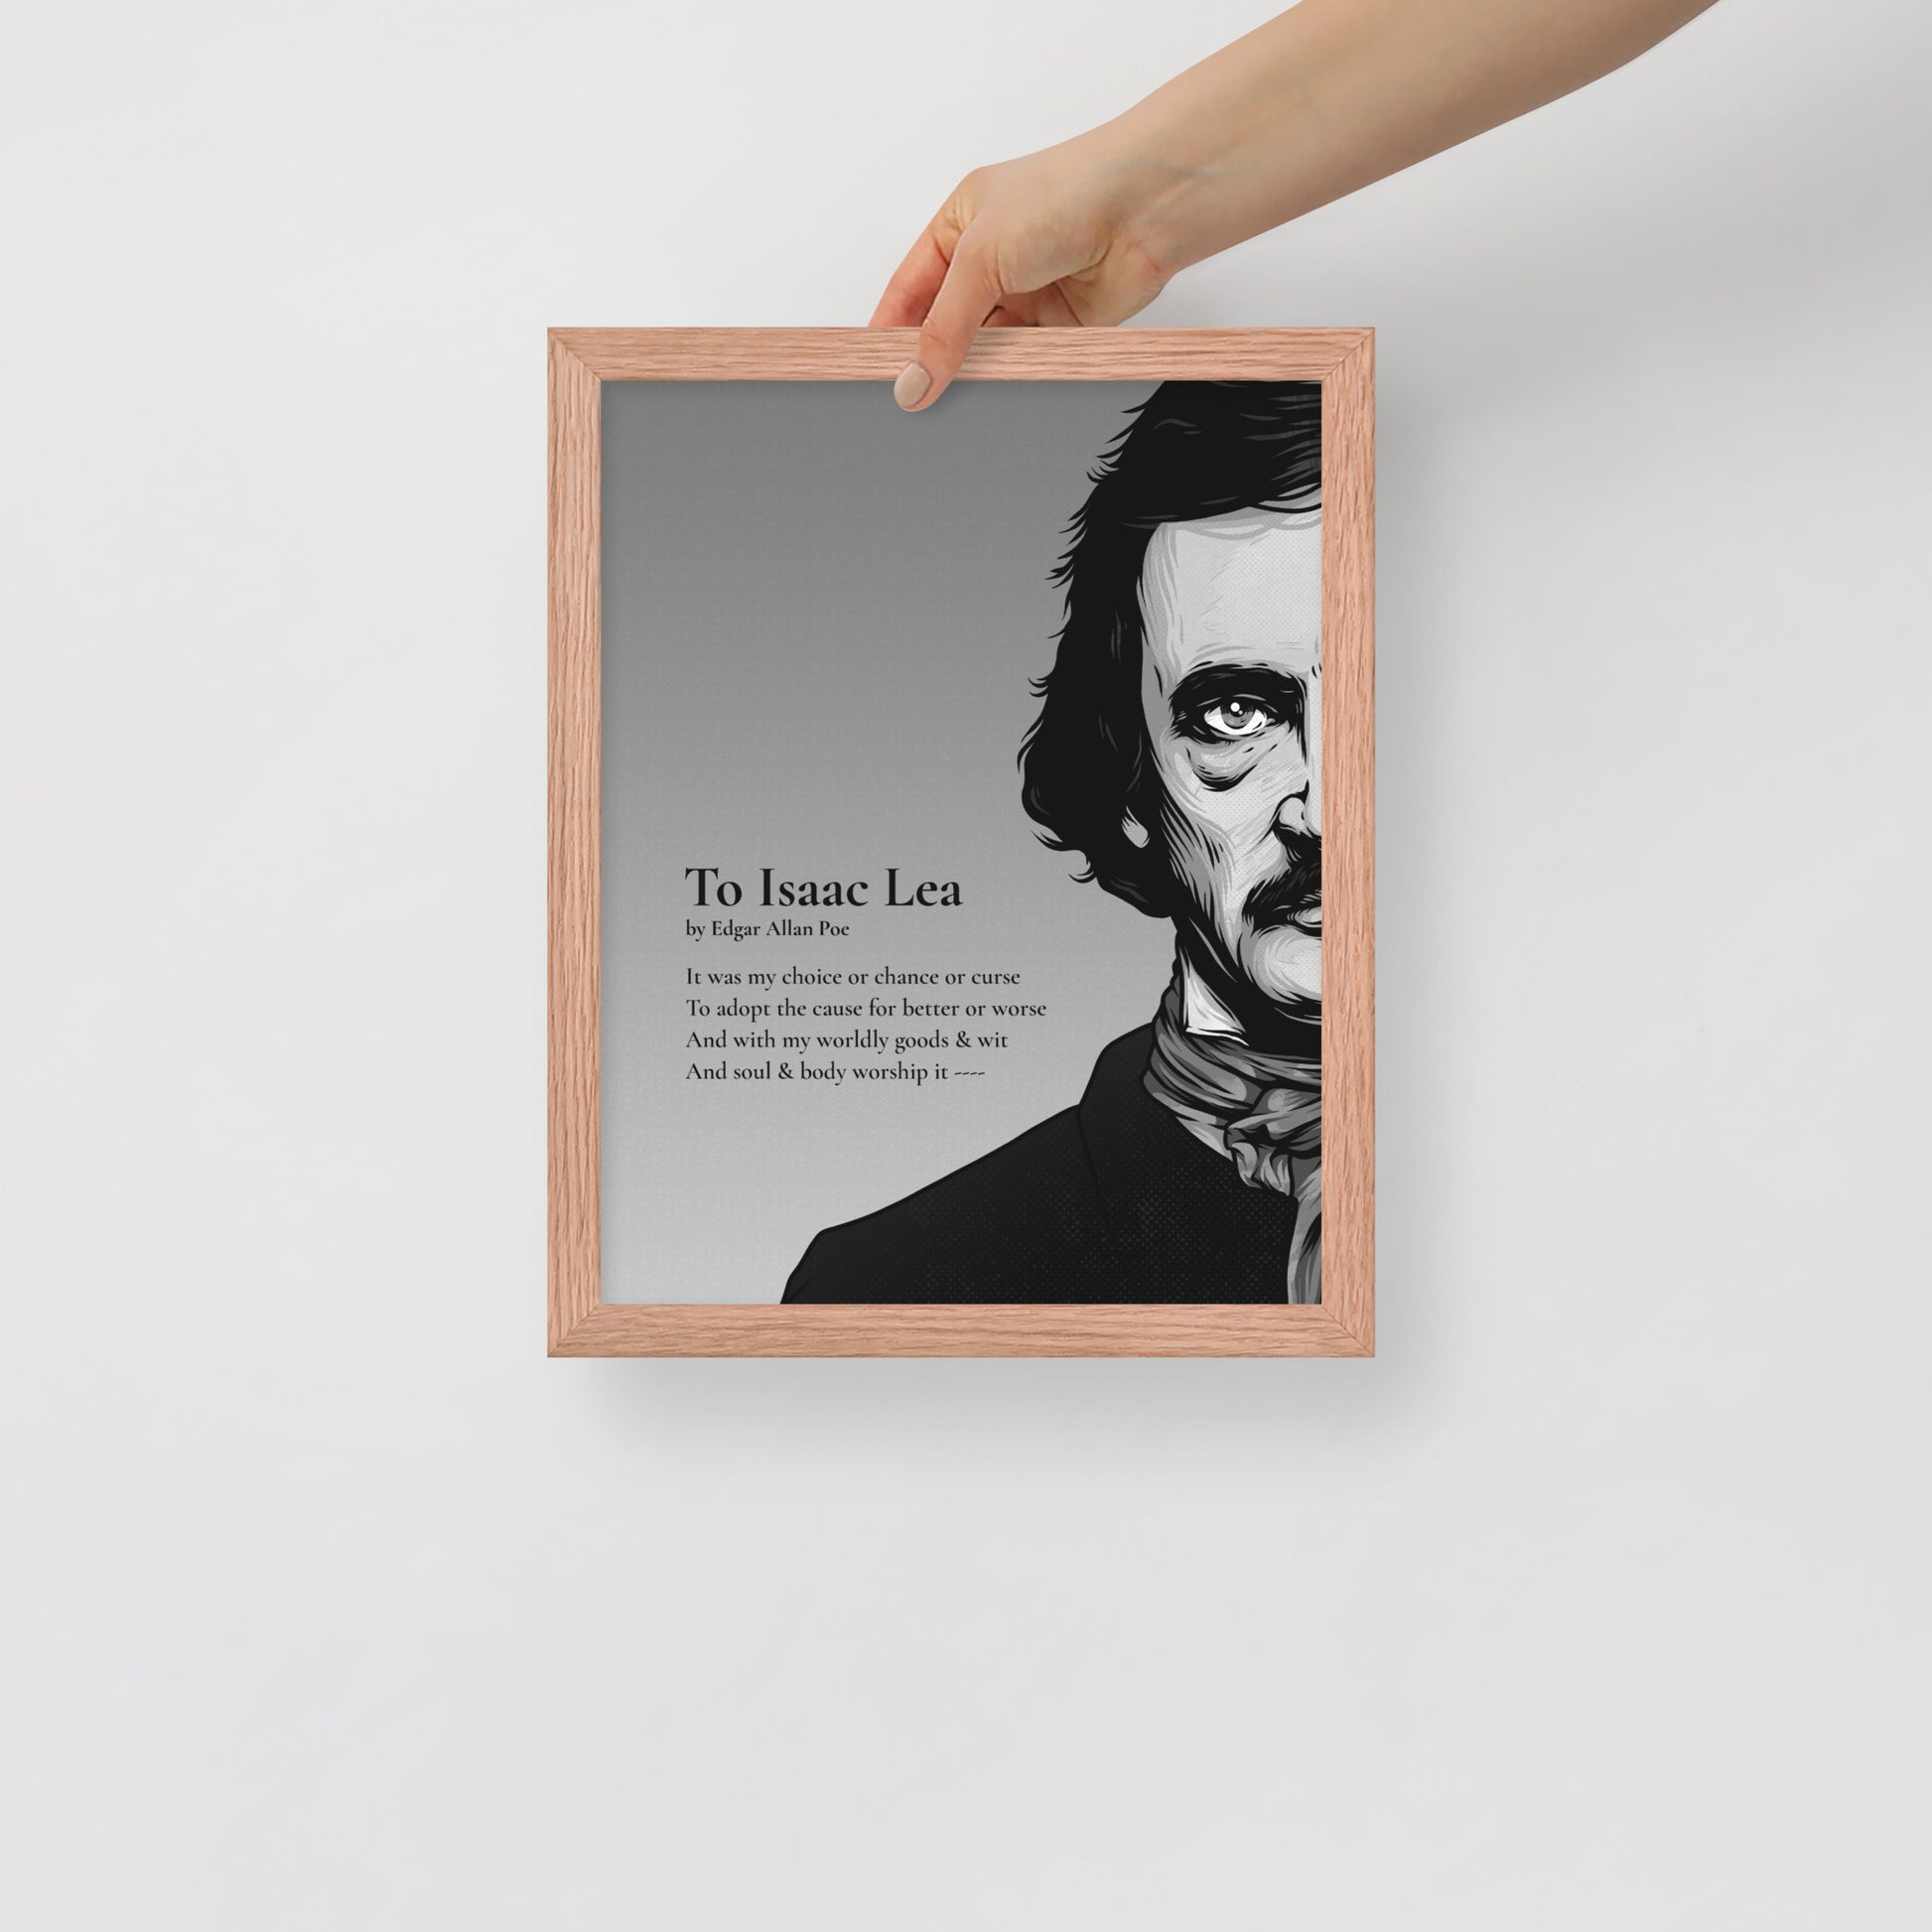 Edgar Allan Poe's 'To Isaac Lea' Framed Matted Poster - 11 x 14 Red Oak Frame